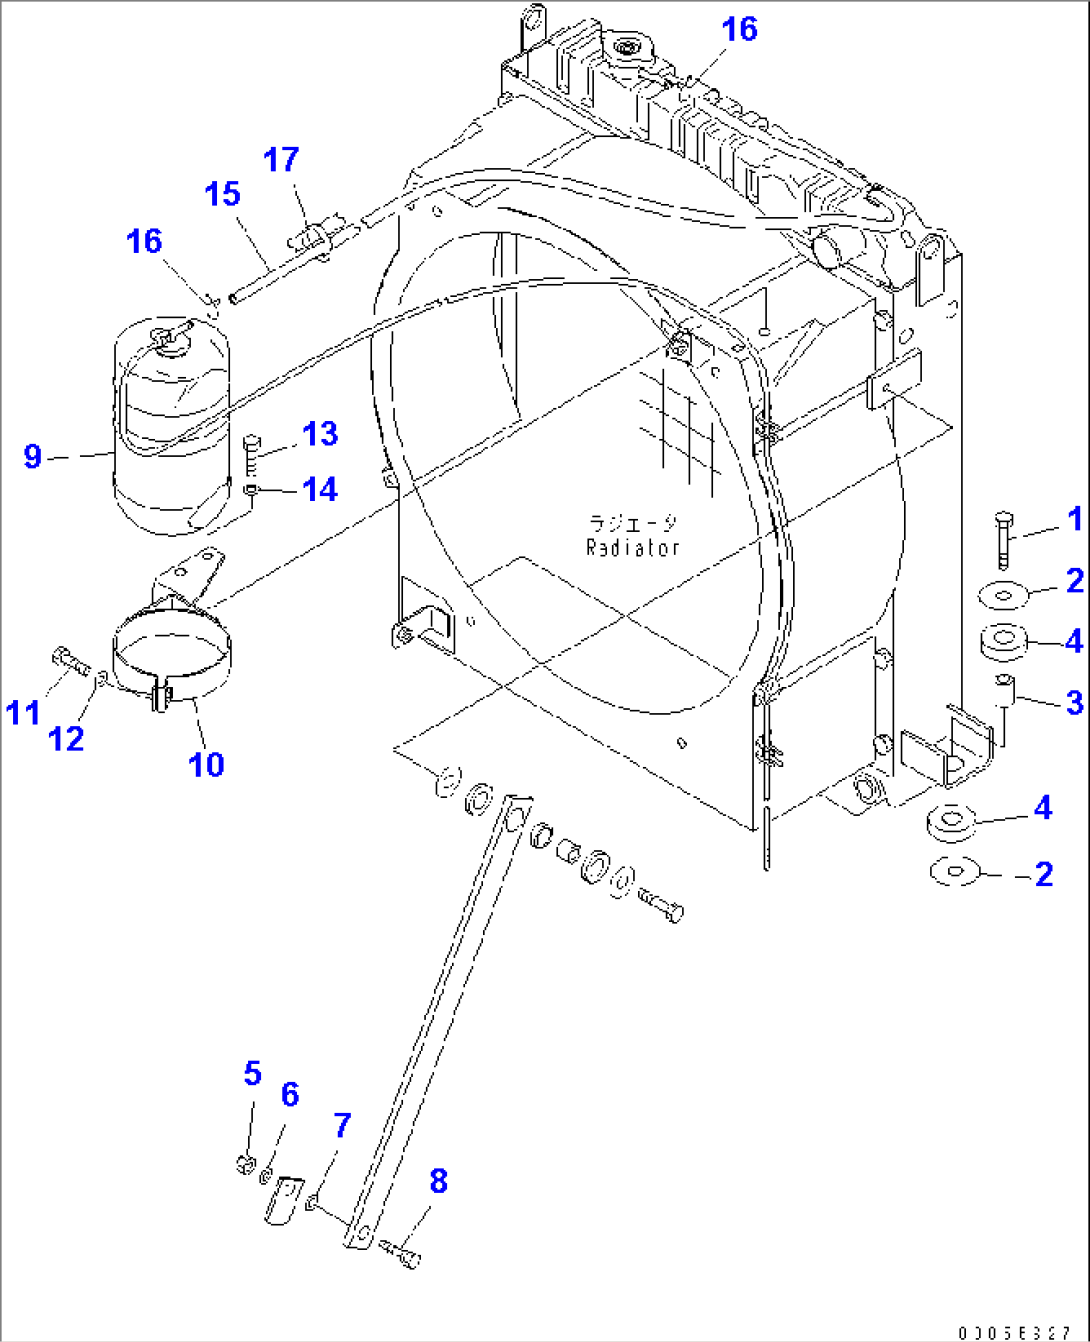 RADIATOR (RESERVE TANK¤ PIPING AND MOUNTING PARTS)(#11508-)